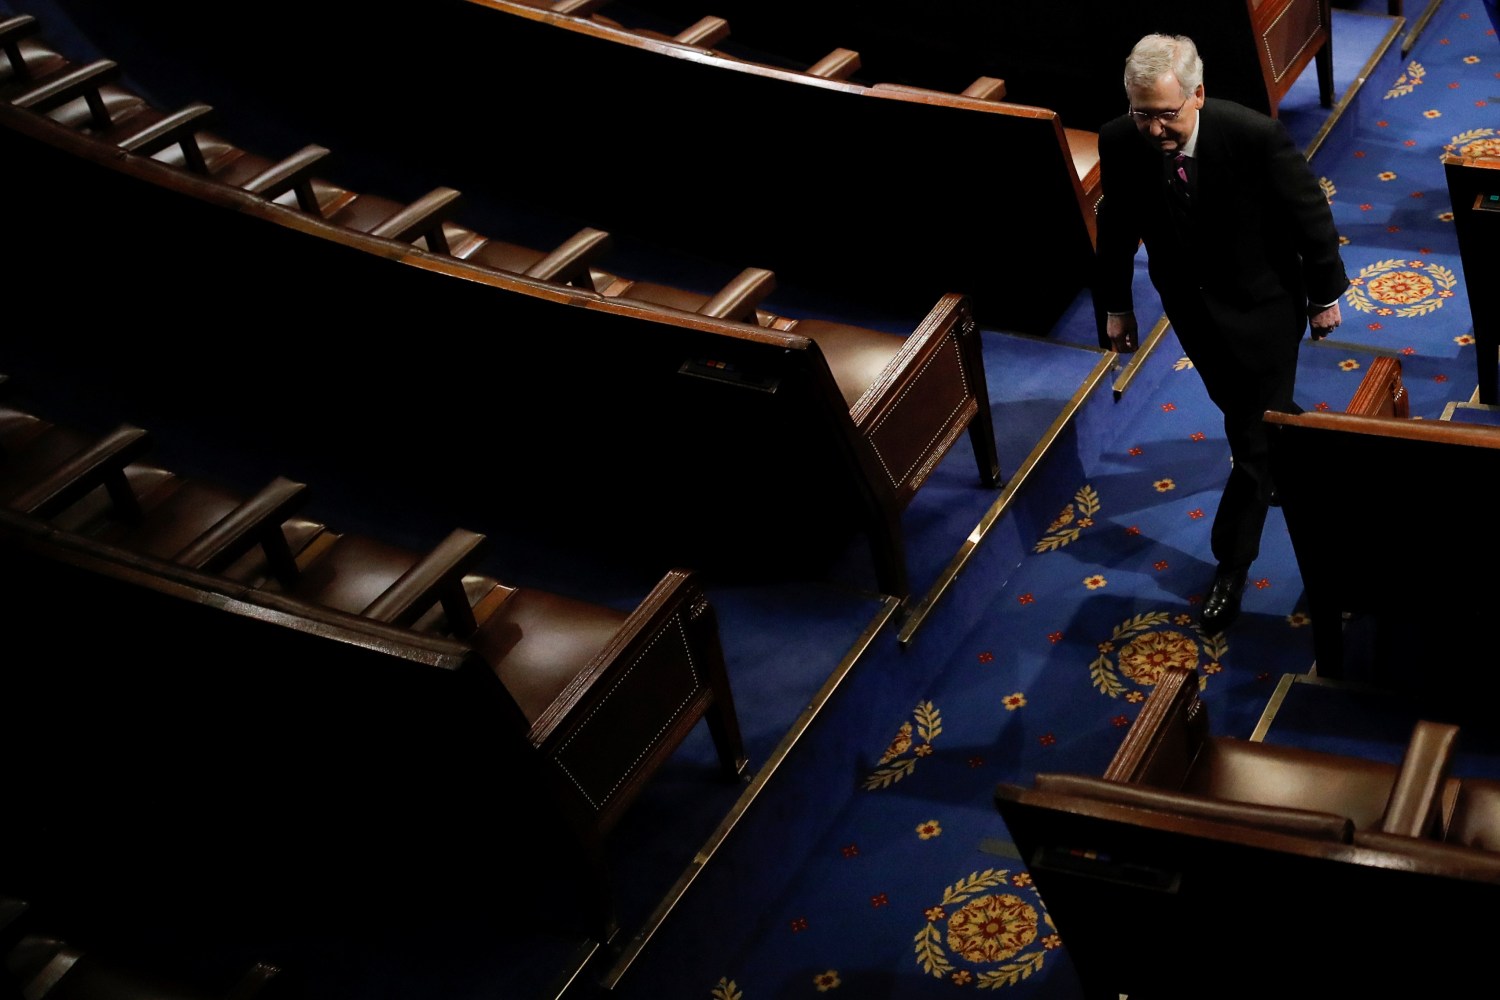 U.S. Senate Majority Leader Mitch McConnell (R-KY) departs the House Chamber after NATO Secretary General Jens Stoltenberg addressed a joint meeting of Congress on Capitol Hill in Washington, U.S., April 3, 2019. REUTERS/Carlos Barria - RC14E4CFDDD0